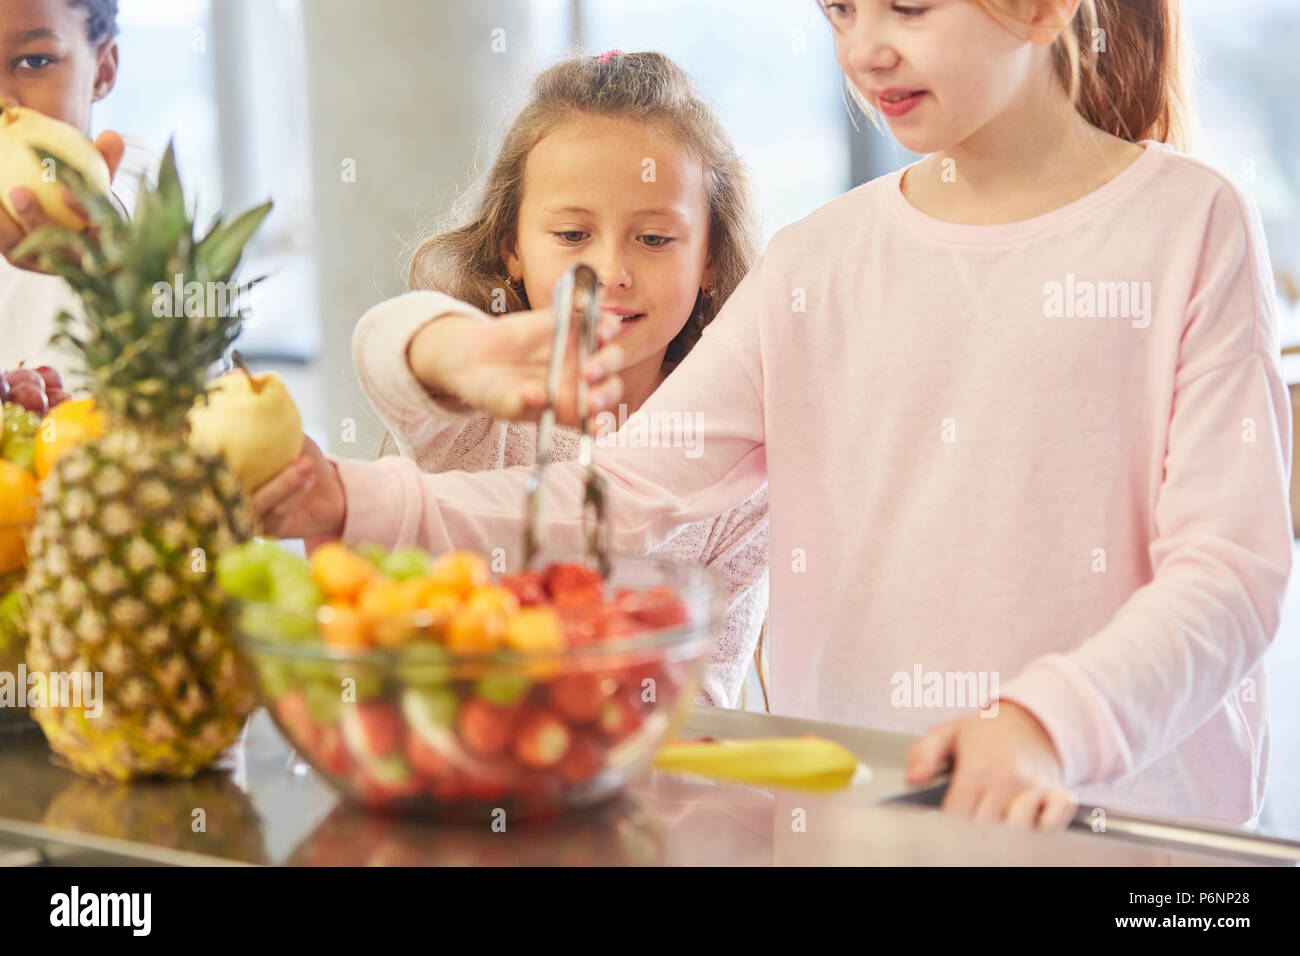 Girl at the fruit buffet of the kindergarten cafeteria take fresh fruit Stock Photo